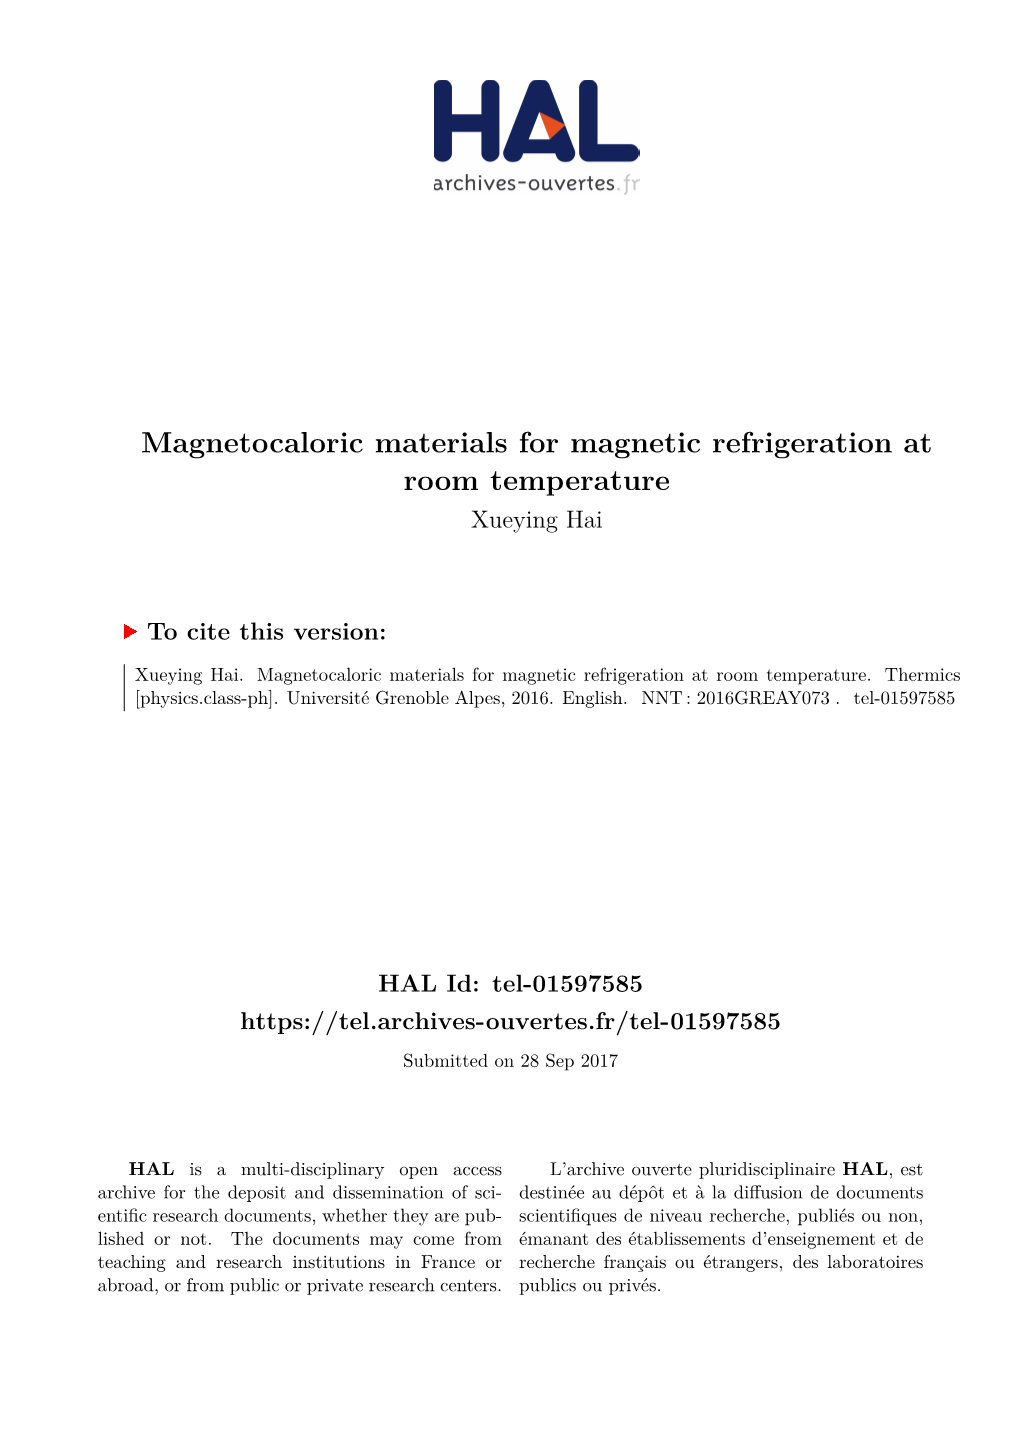 Magnetocaloric Materials for Magnetic Refrigeration at Room Temperature Xueying Hai